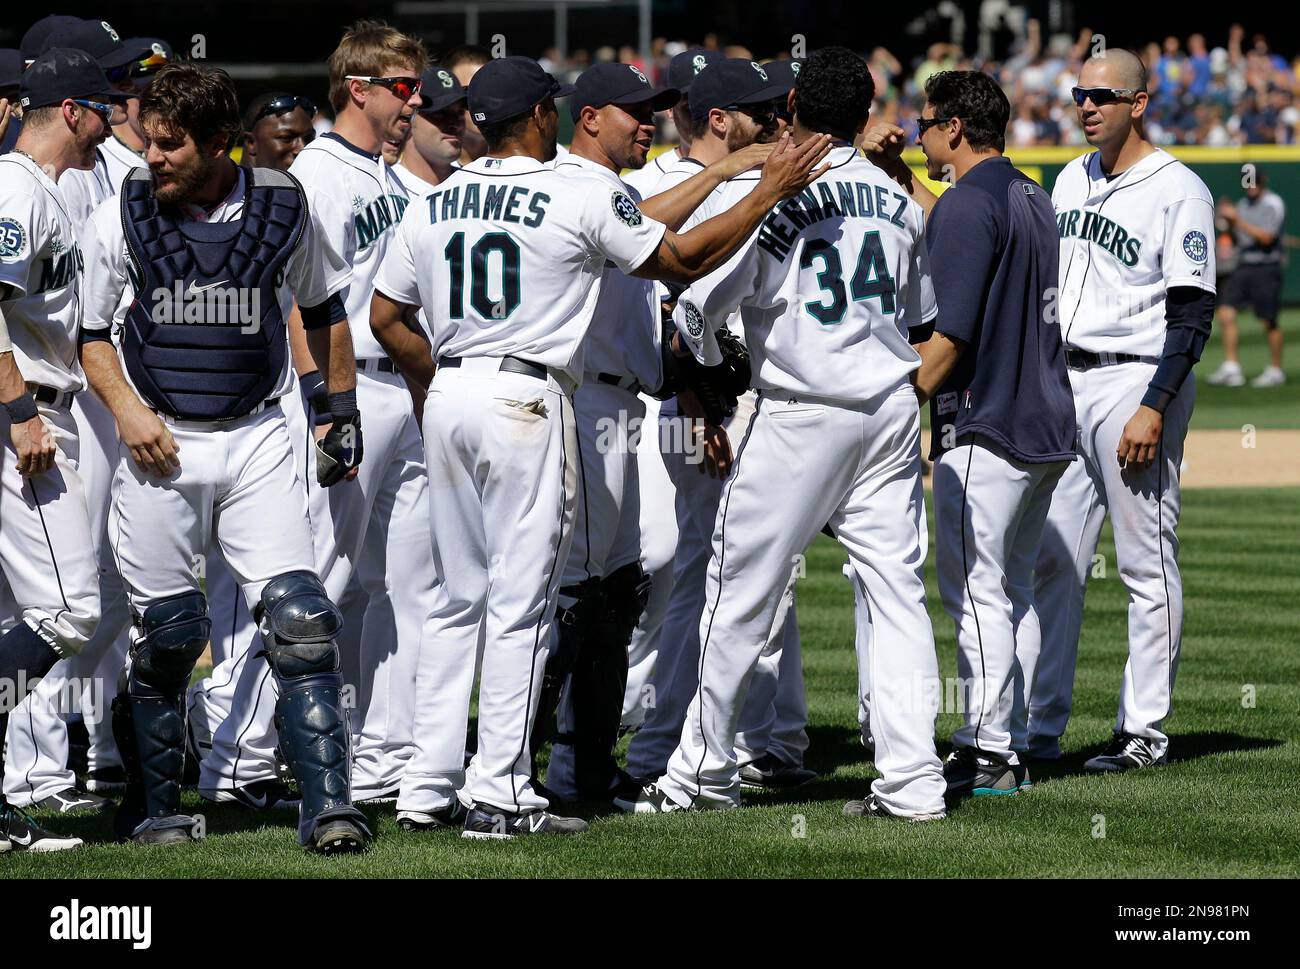 Mariners' Hernandez throws perfect game against Rays